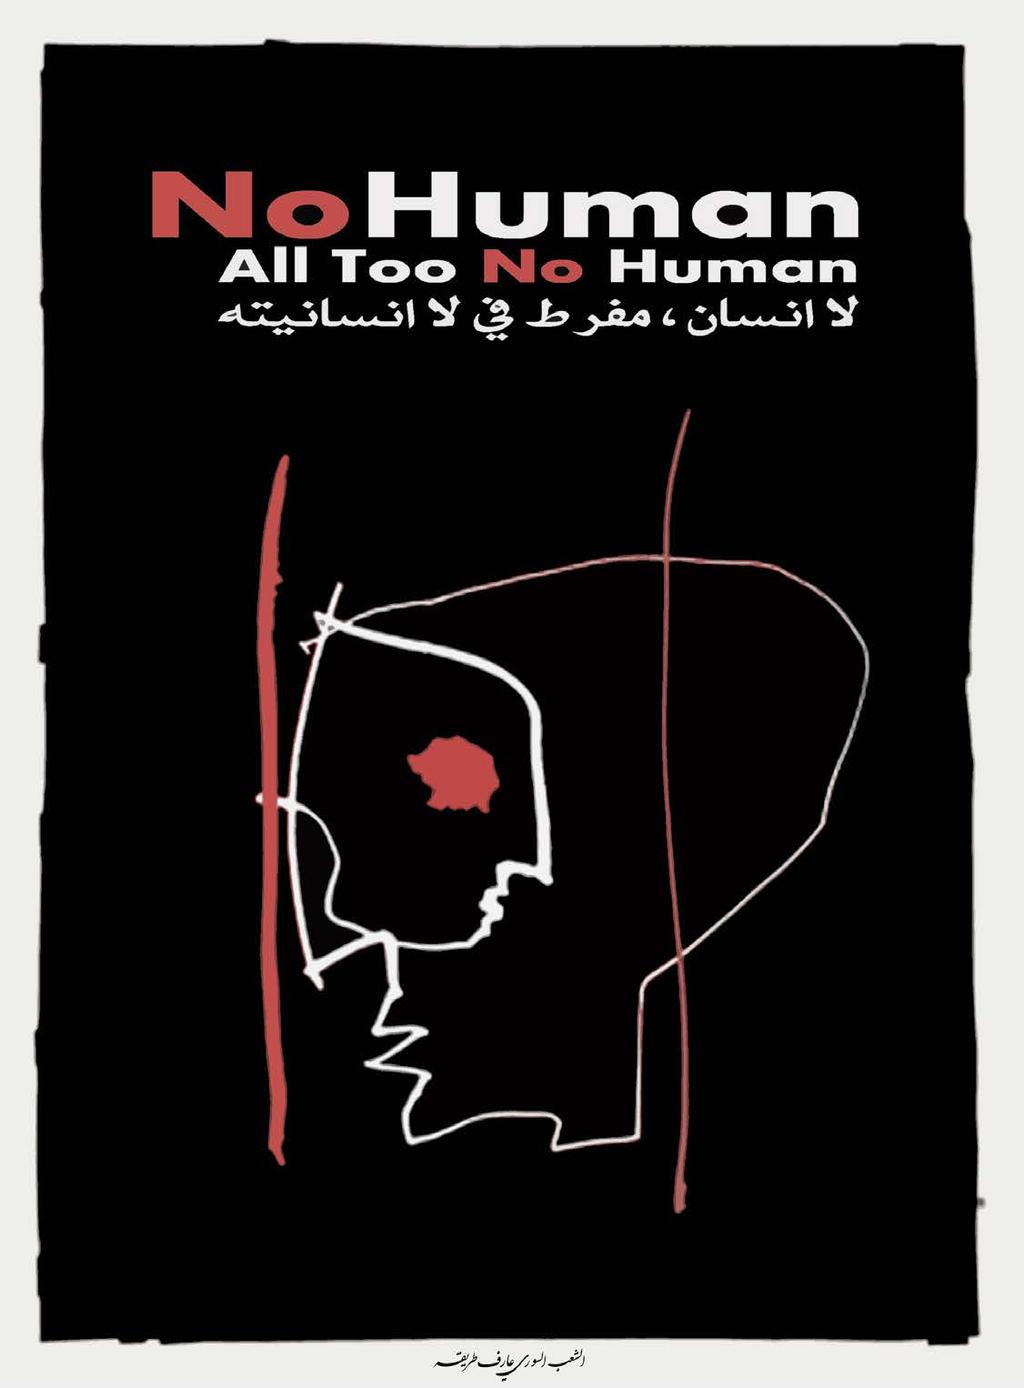 THERE IS NO HUMAN